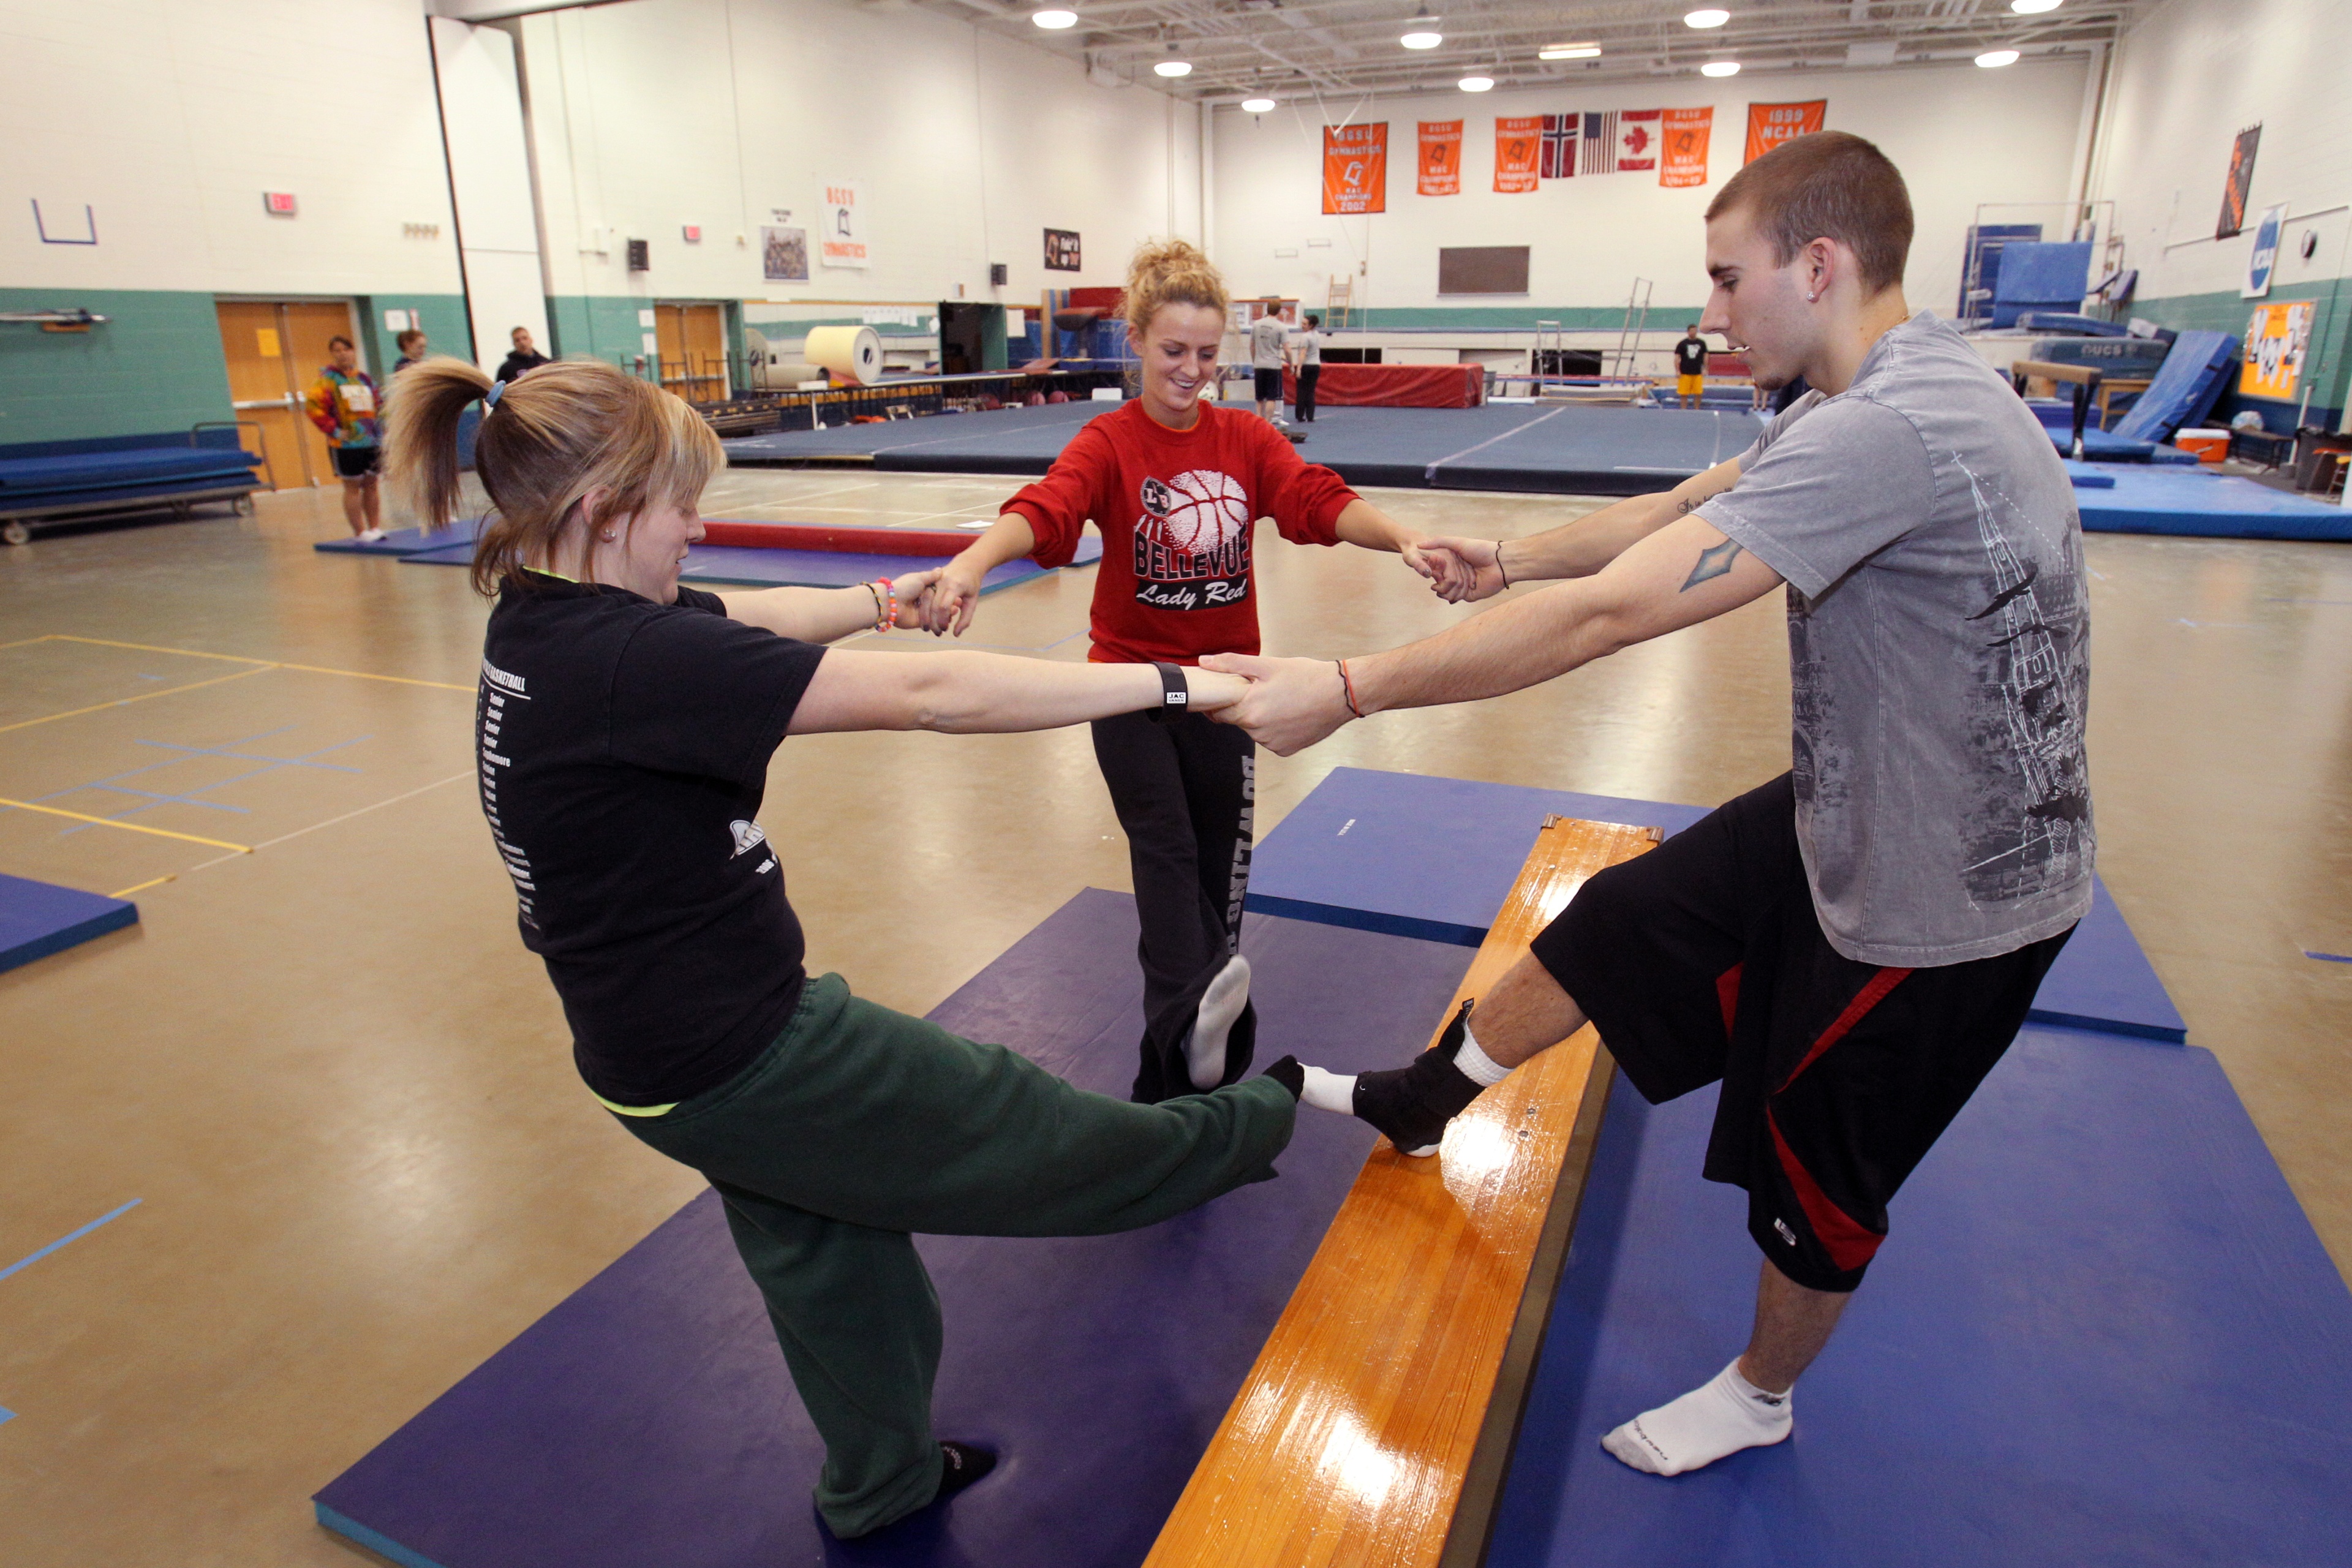 Three BGSU Kinesiology master's students practice strength exercises in a dedicated Fitness Center on our Ohio campus.